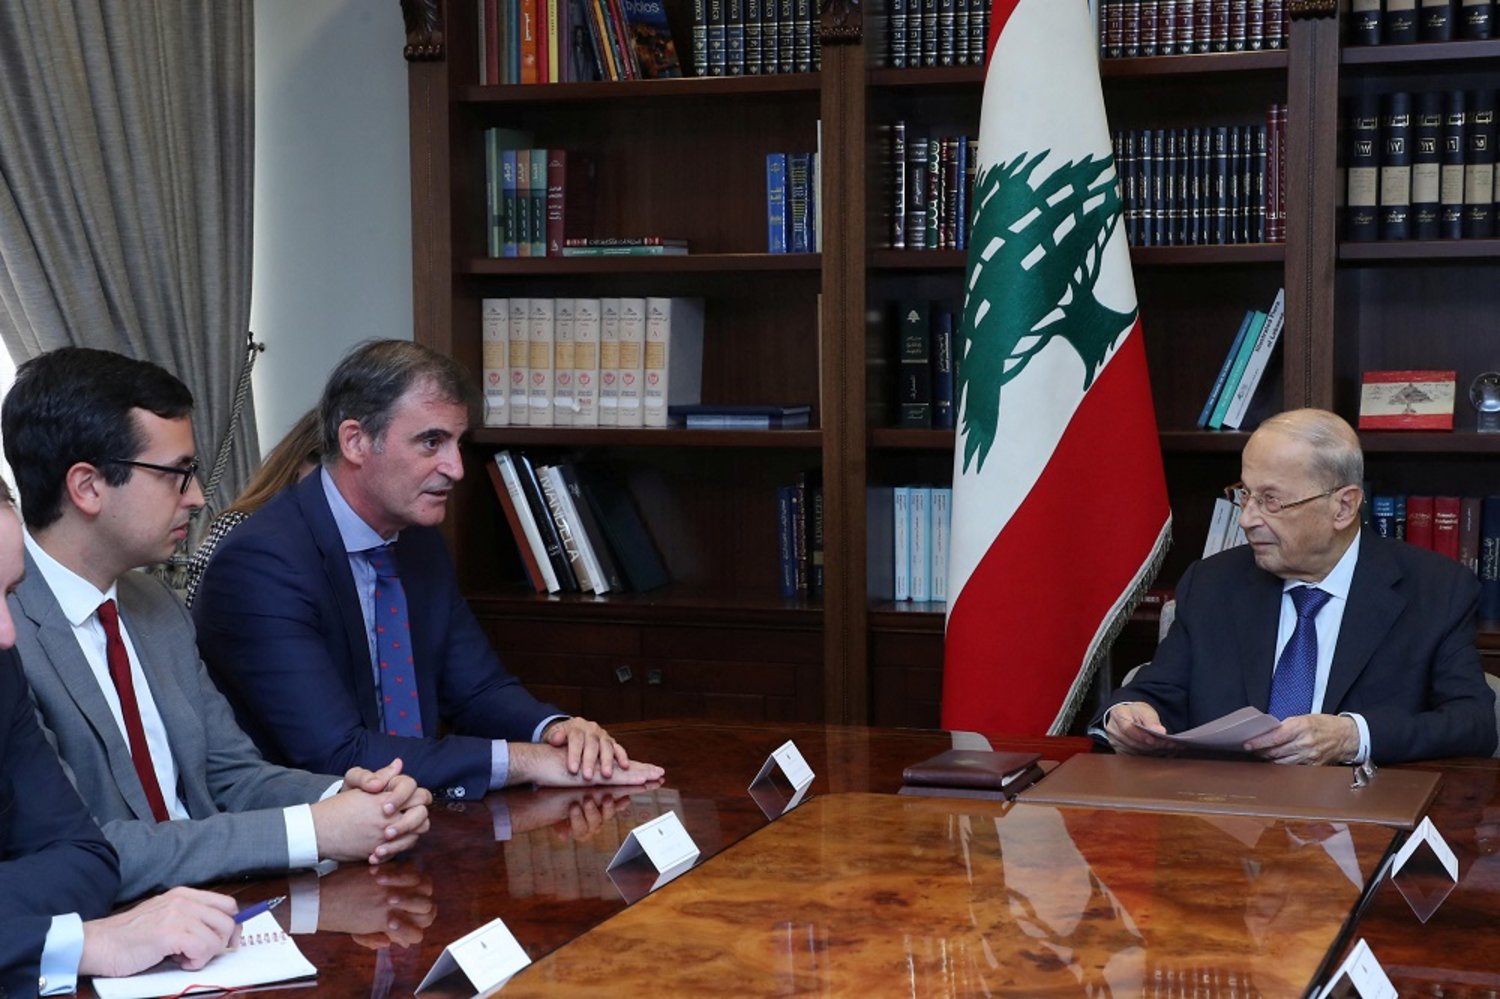 Lebanon's President Michel Aoun meets with a delegation from the International Monetary Fund at the presidential palace in Baabda, Lebanon September 21, 2022. (Dalati & Nohra)